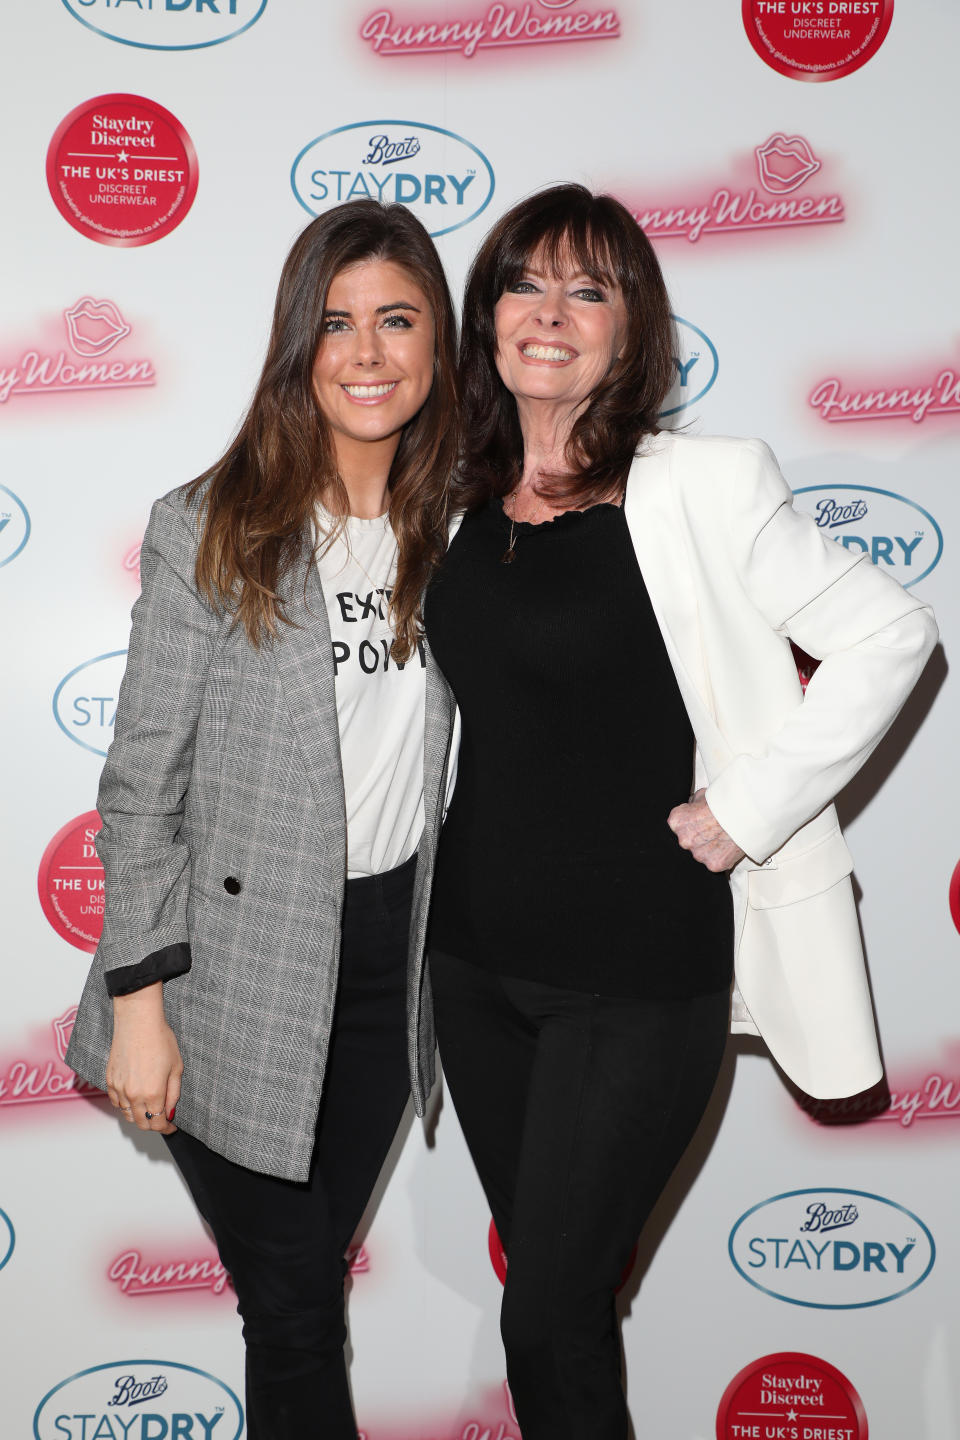 LONDON, ENGLAND - FEBRUARY 25: (L) Louise Michelle and (R) Vicki Michelle attend the Boots Staydry Women Take The P**s Comedy Night at Boulevard Theatre on February 25, 2020 in London, England. The event was held to challenge the taboo associated with female incontinence and encourage women to talk more openly about the condition.  (Photo by Lia Toby/Getty Images for Boots Staydry )